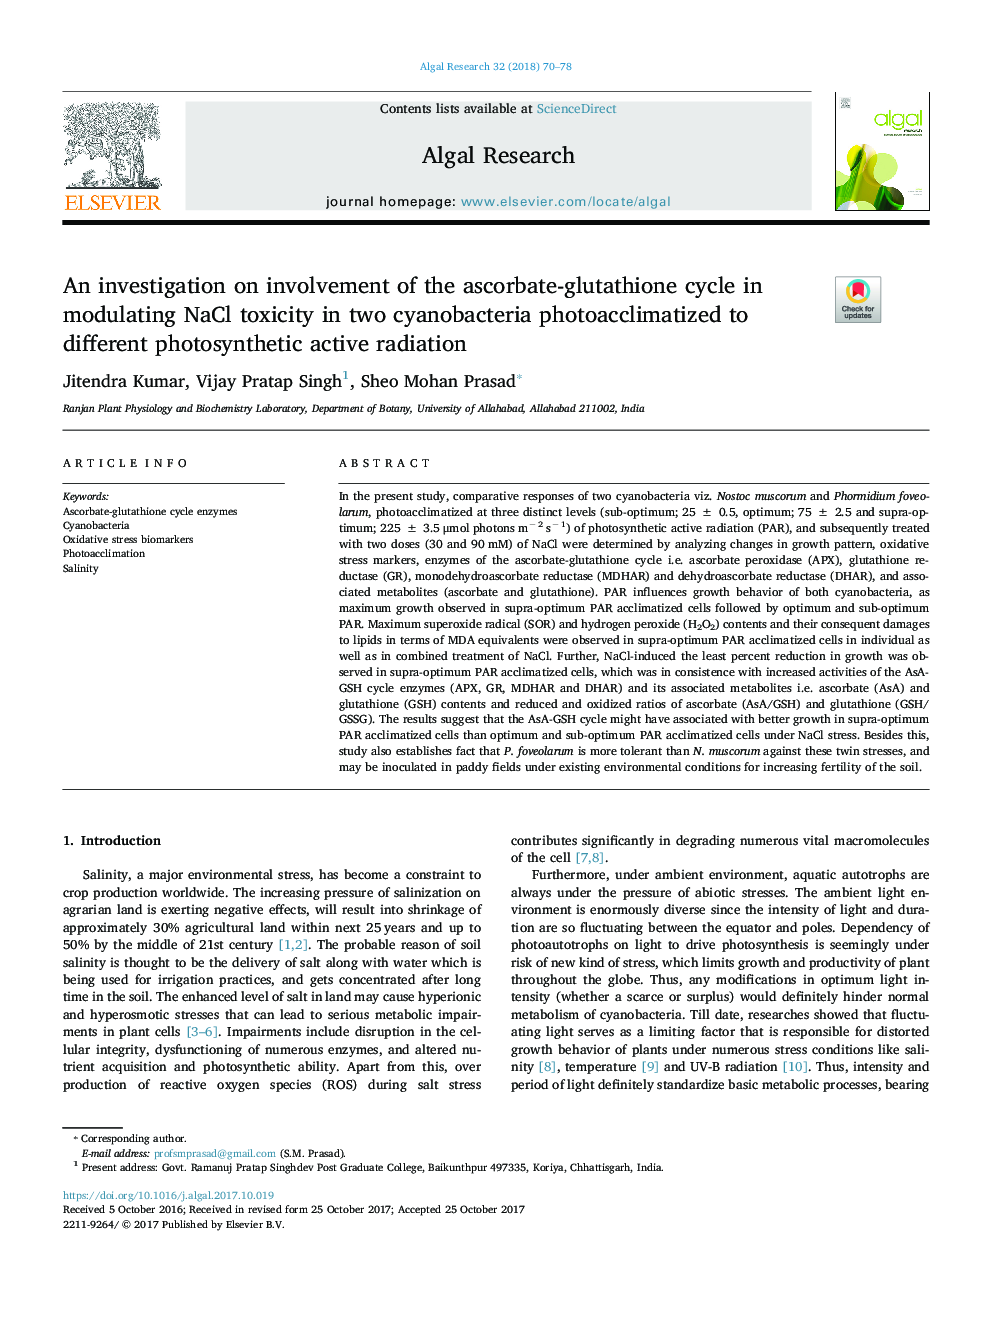 An investigation on involvement of the ascorbate-glutathione cycle in modulating NaCl toxicity in two cyanobacteria photoacclimatized to different photosynthetic active radiation